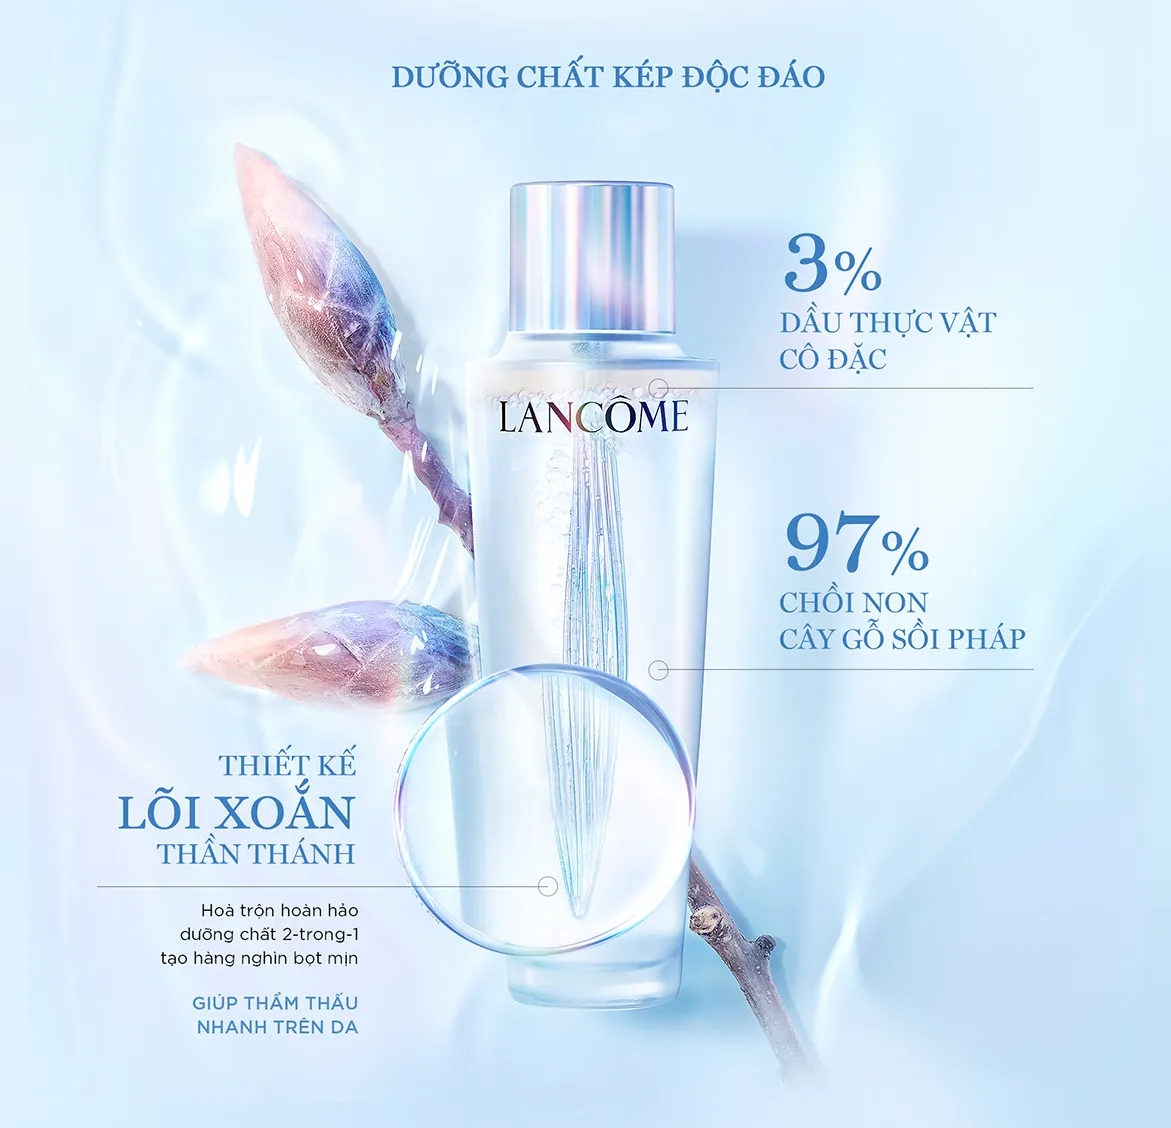 Nuoc than duong chat kep Lancome2 1